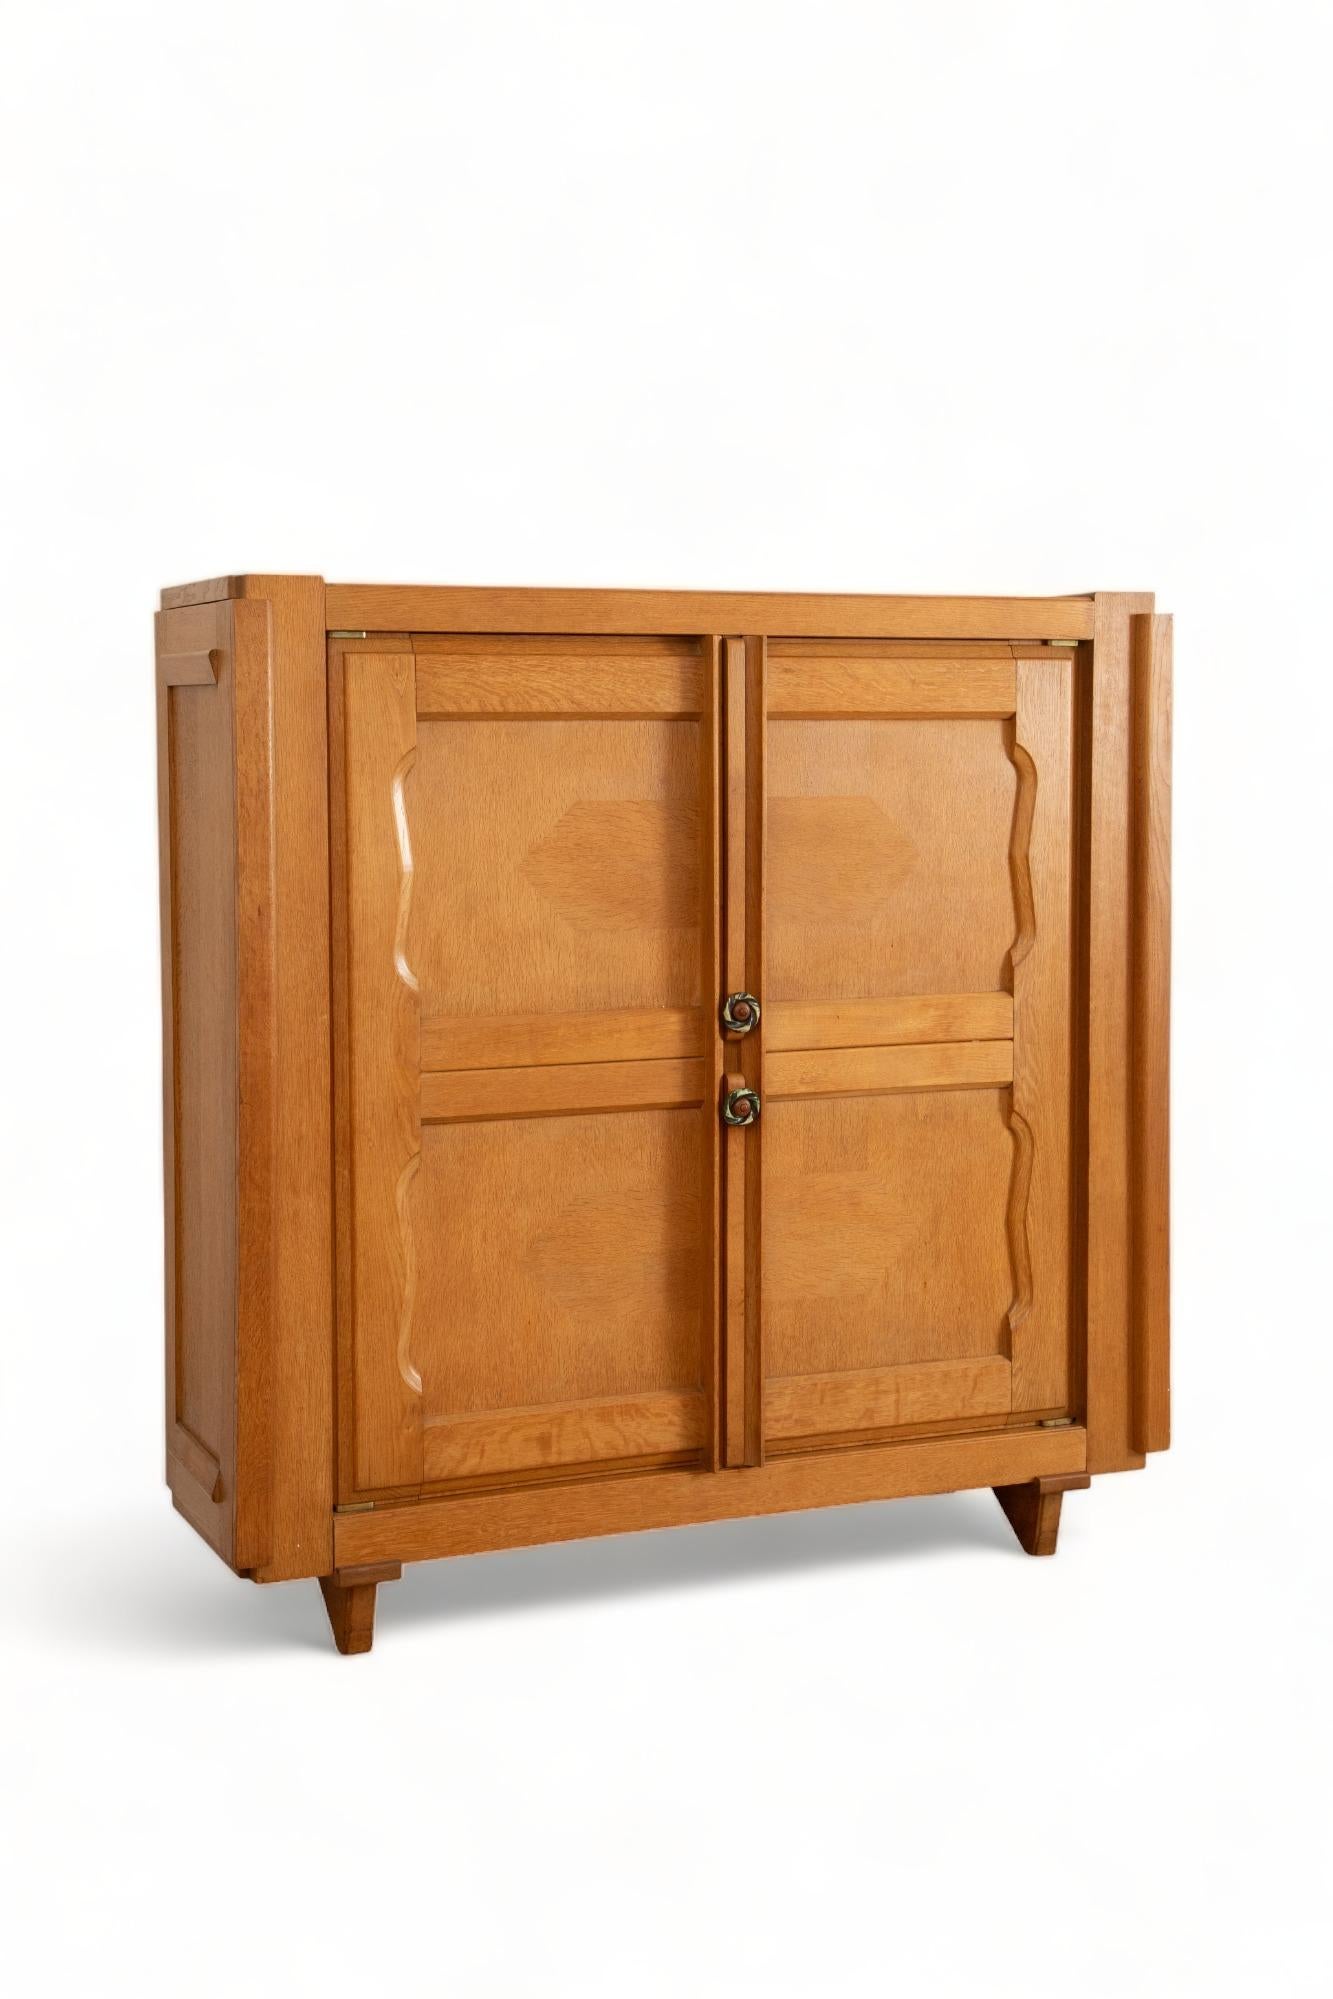 Two door oak cabinet cupboard by Guillerme et Chambron, France 1960
Front doors have decorative inlaid panels, with glazed ceramic handles by  artist Boleslaw Danikowski
Two front doors opening to four move-able shelves .
Two side doors with hidden